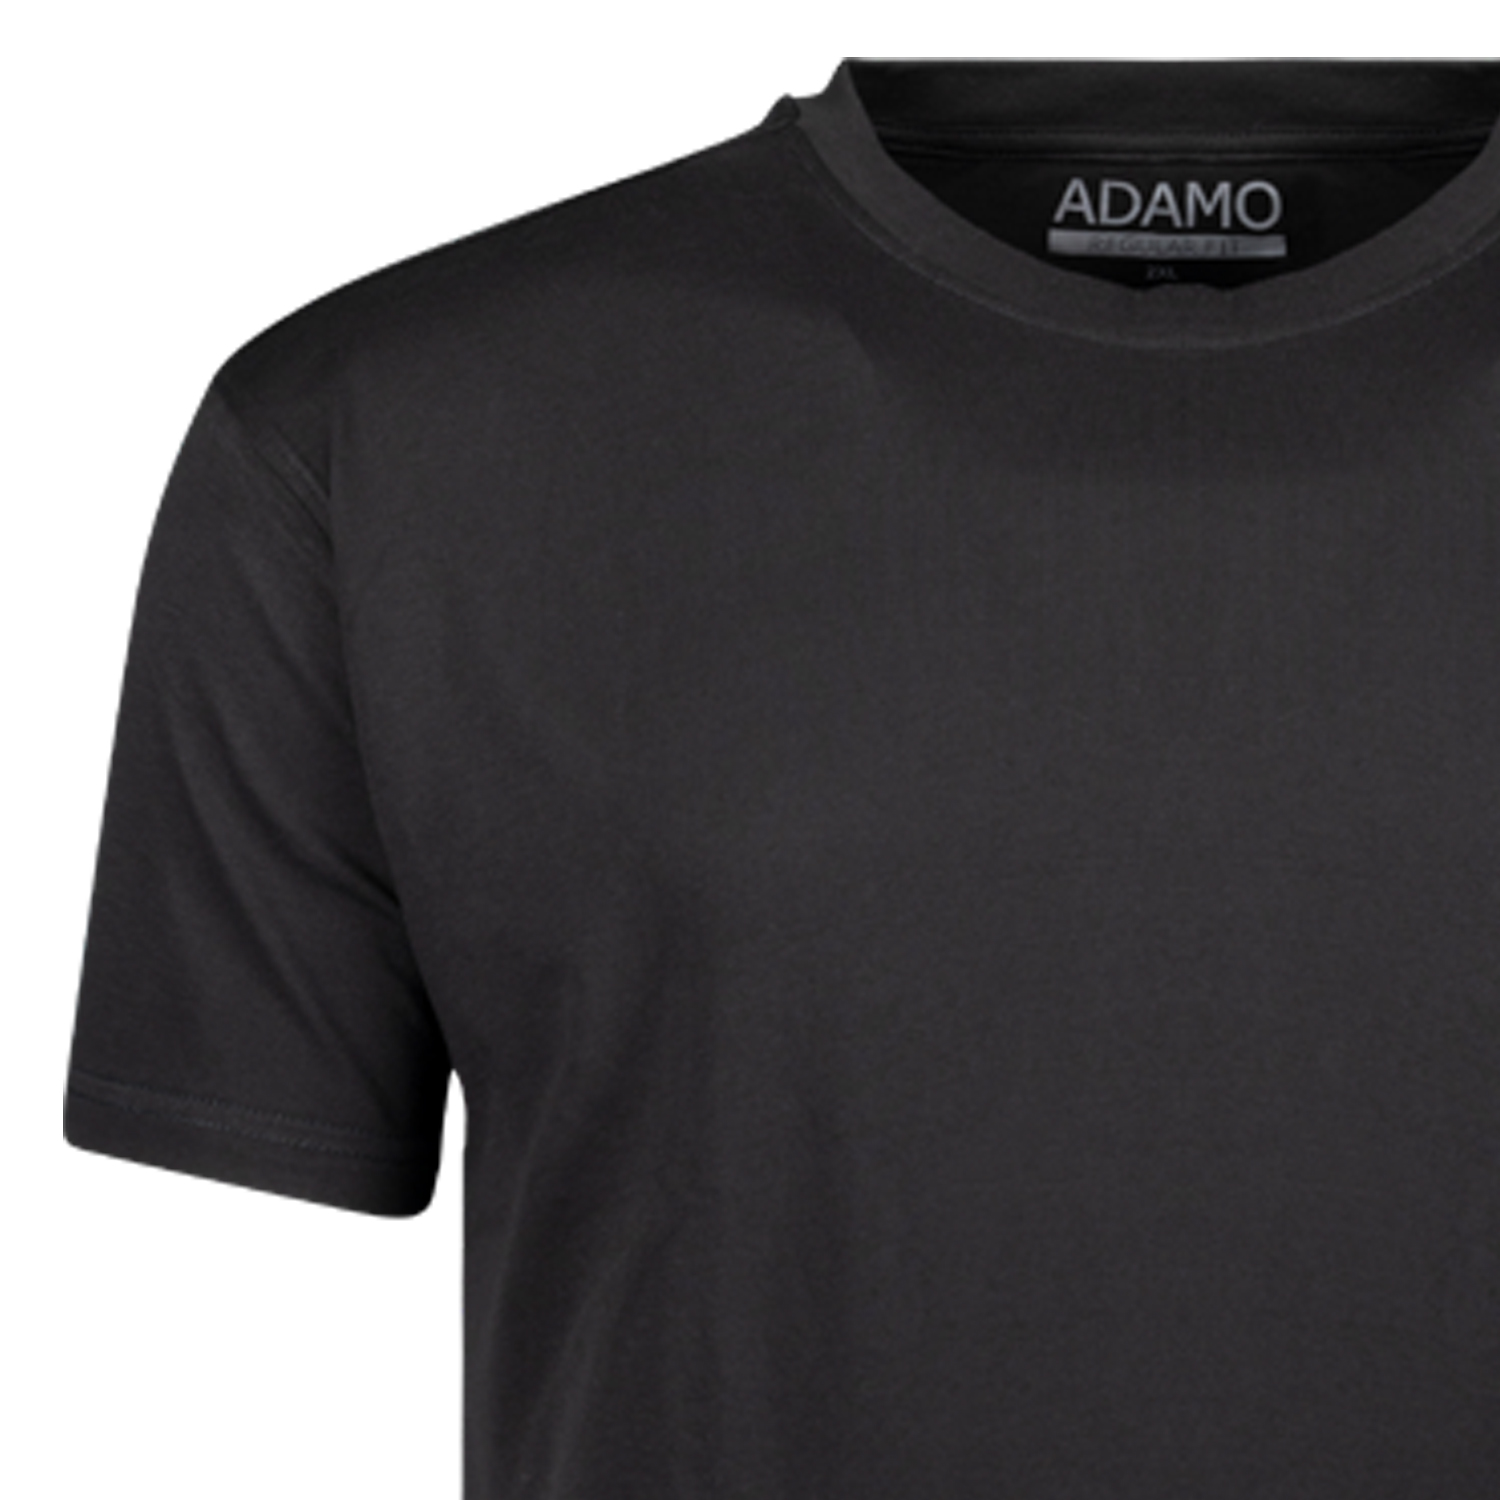 T-shirts in black series Kevin regular fit by Adamo for men up to oversize 10XL